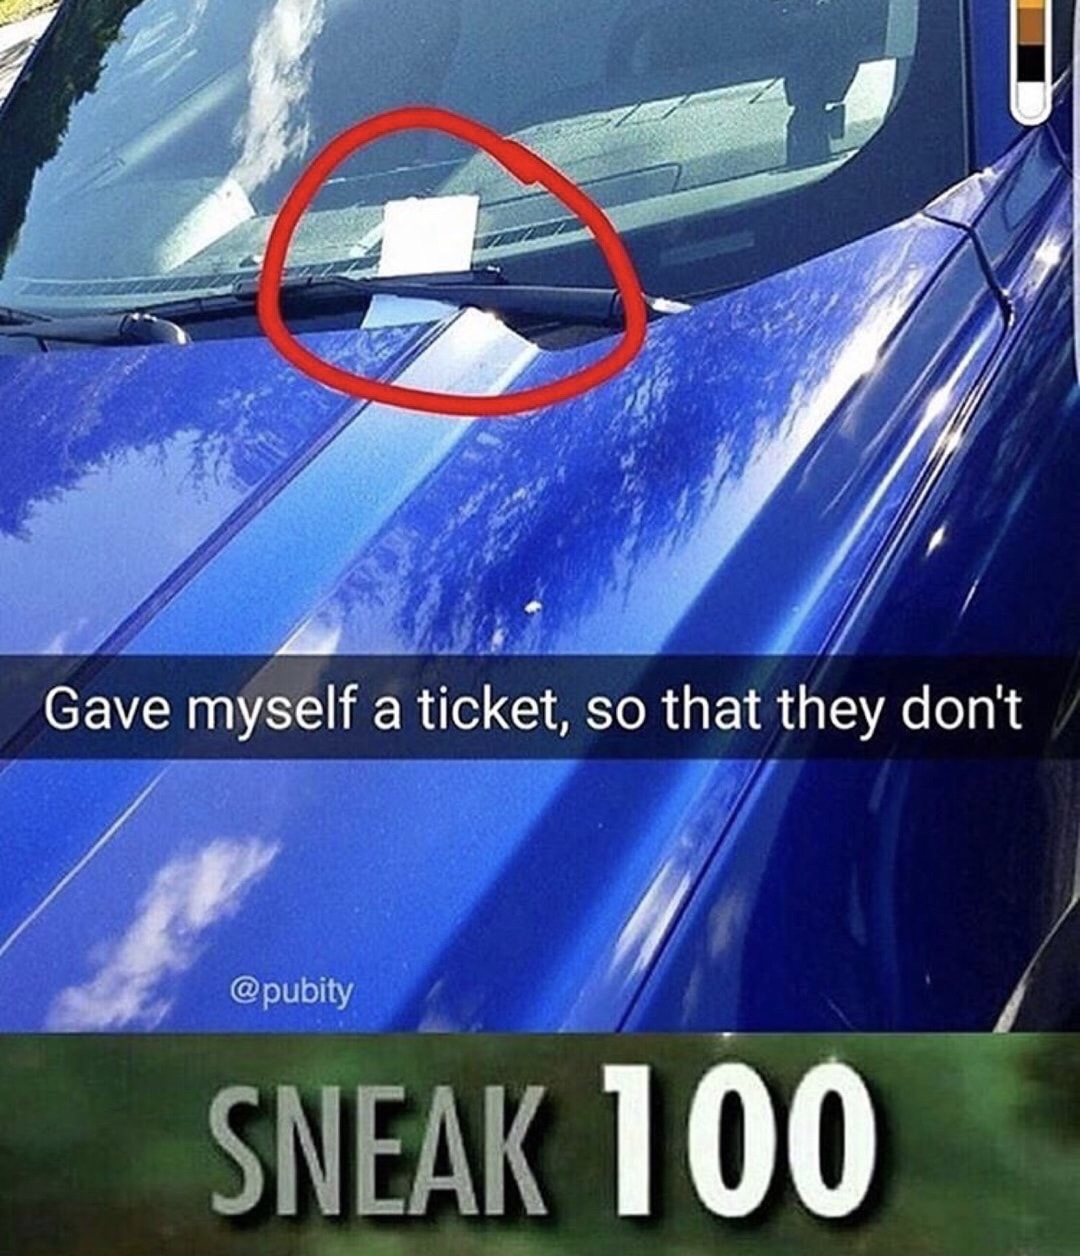 sneak 100 meme - Gave myself a ticket, so that they don't Sneak 100